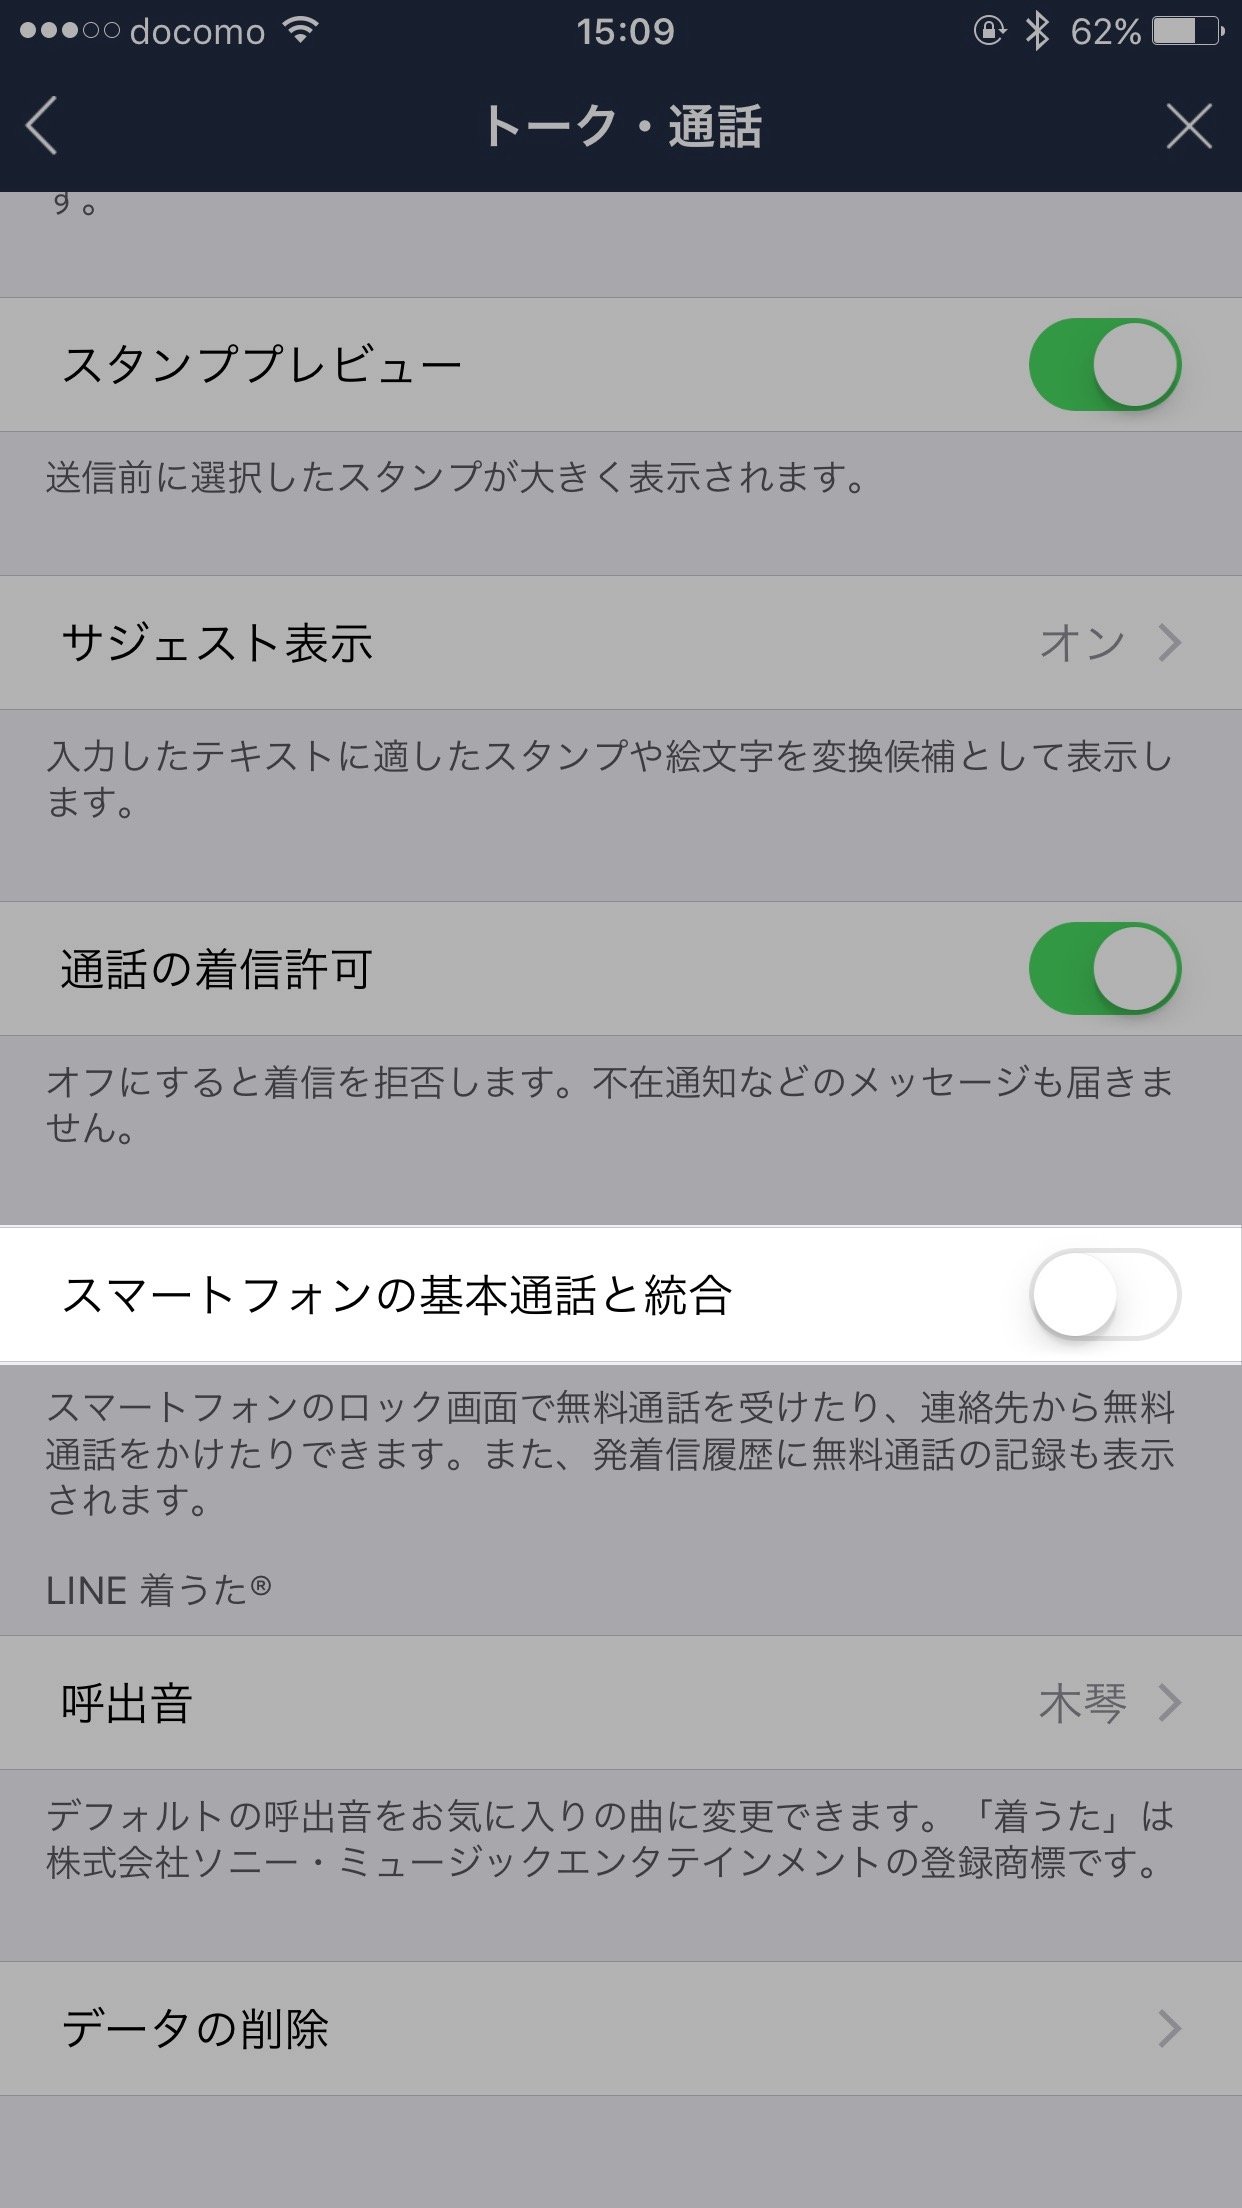 LINE、Ver 6.8.6を配信。無料通話の不具合に対応